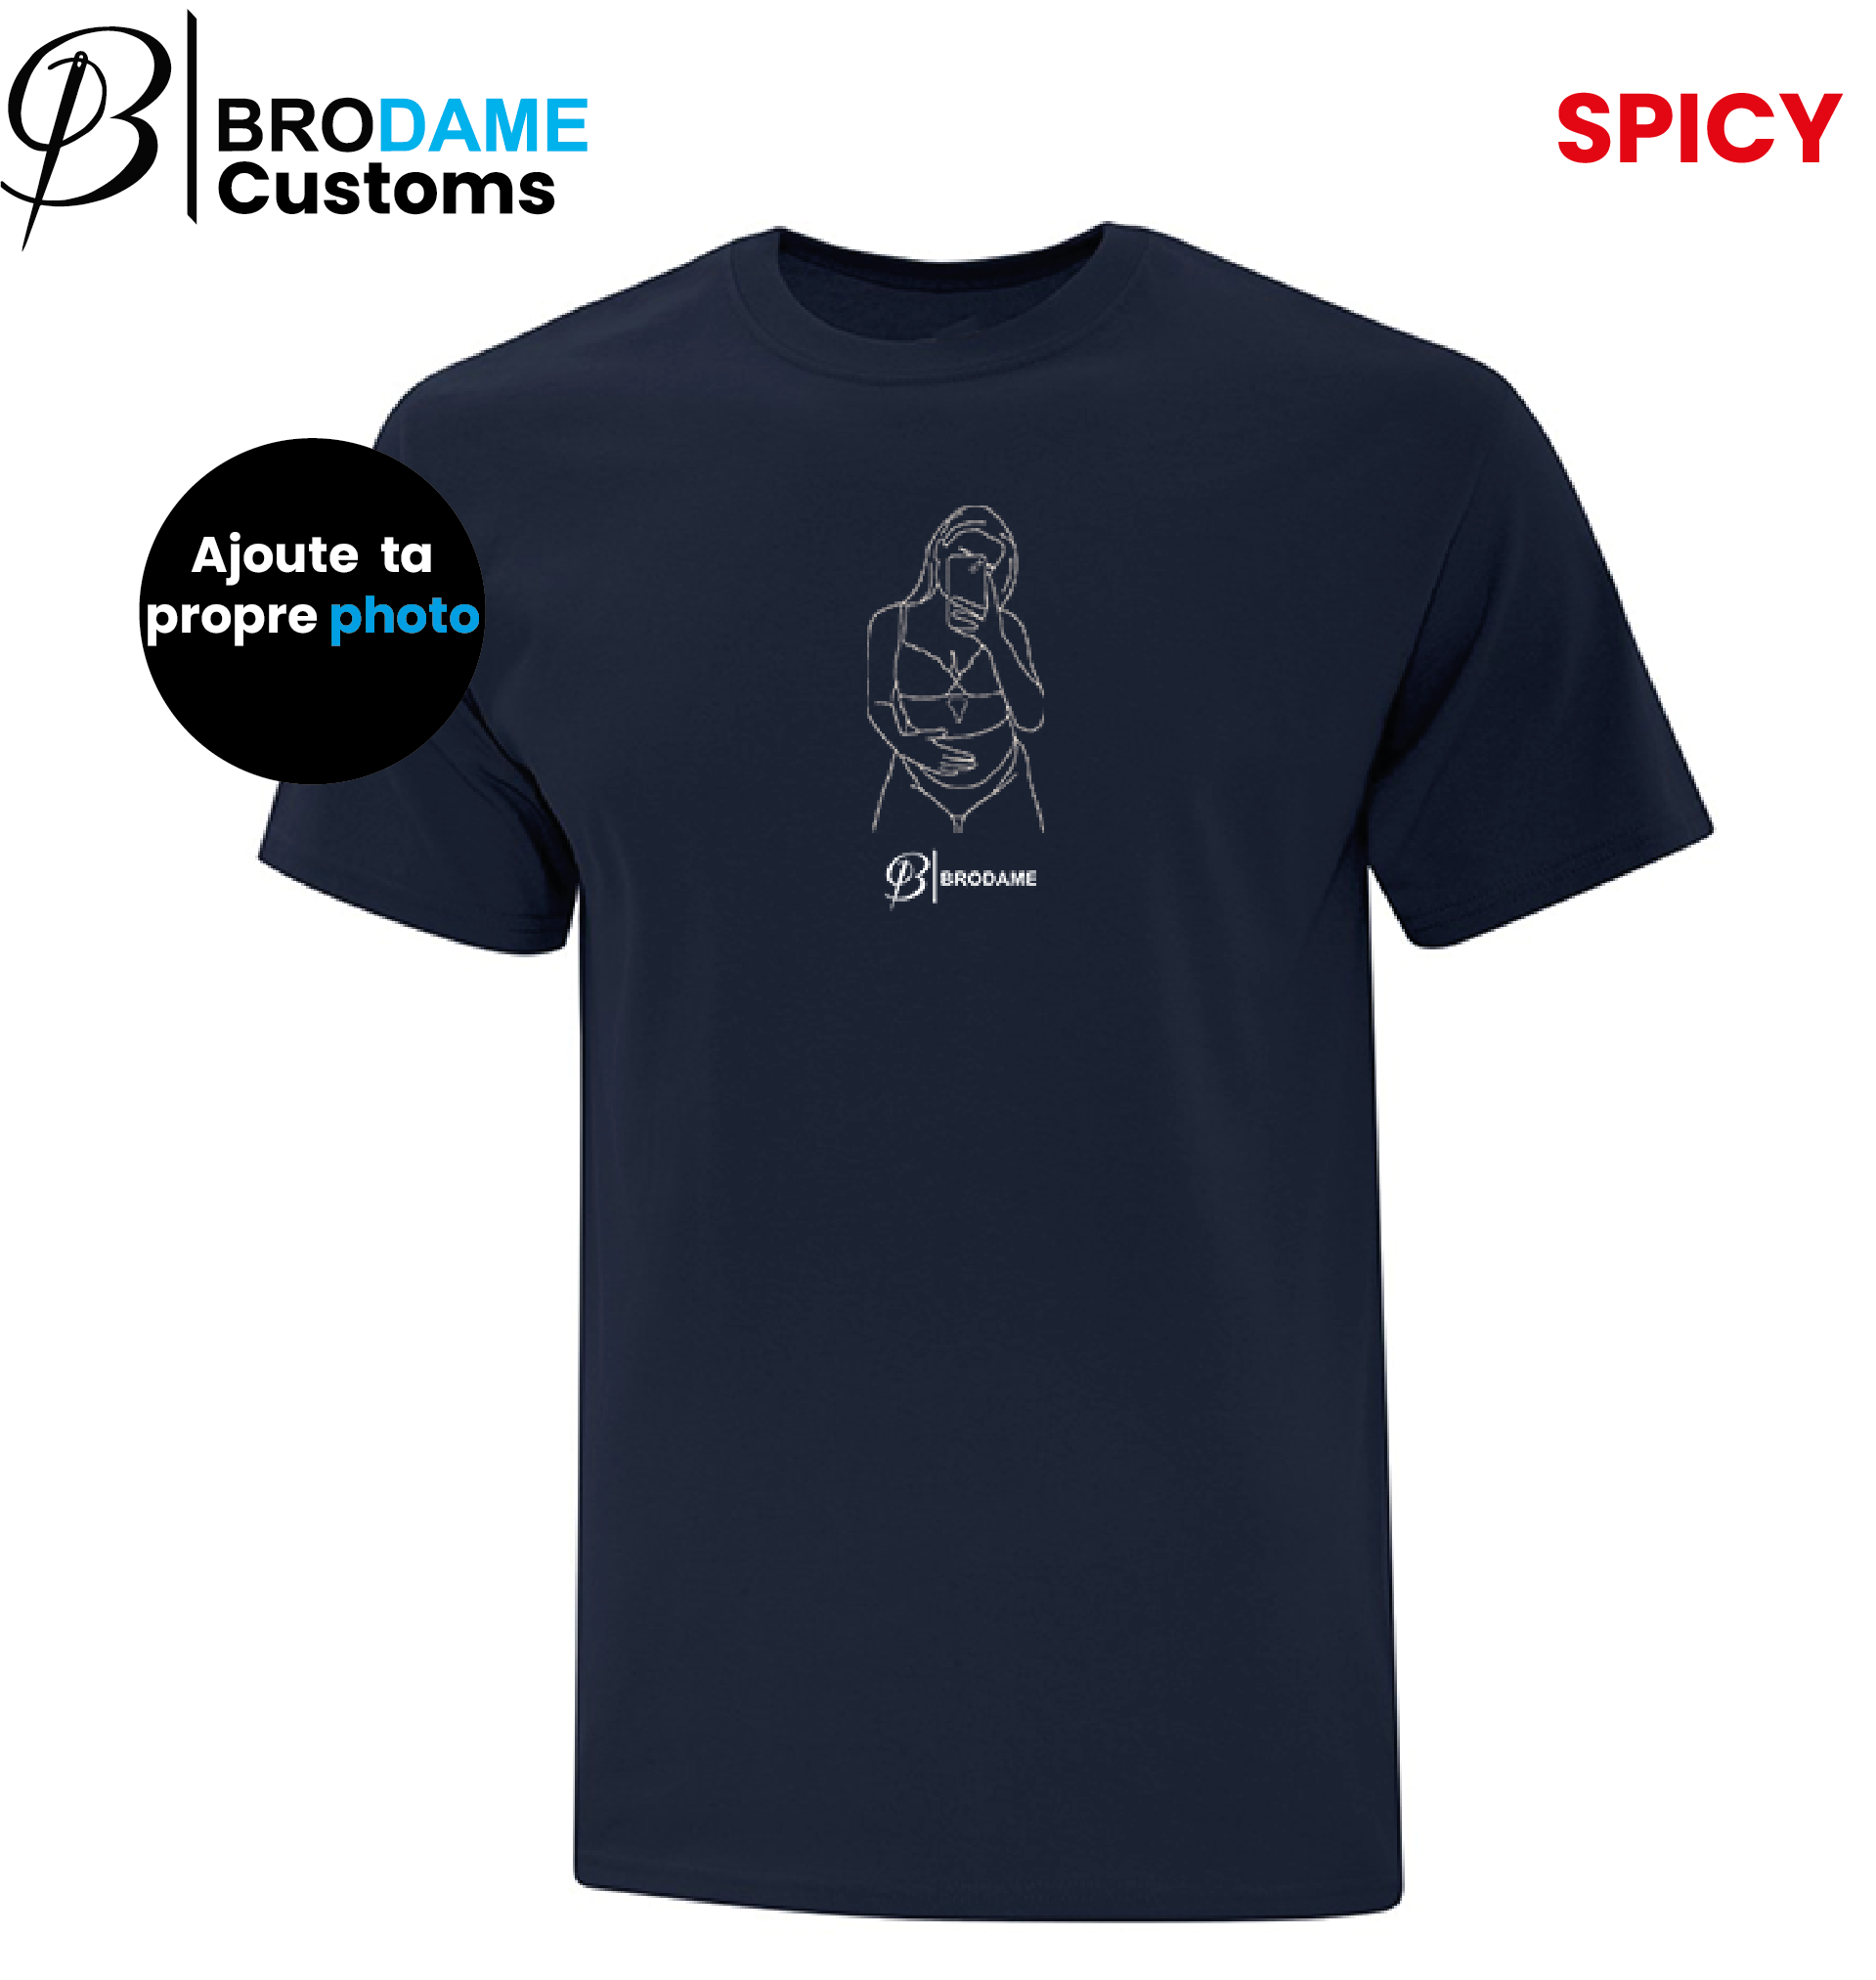 SPICY personalized silhouette T-shirt